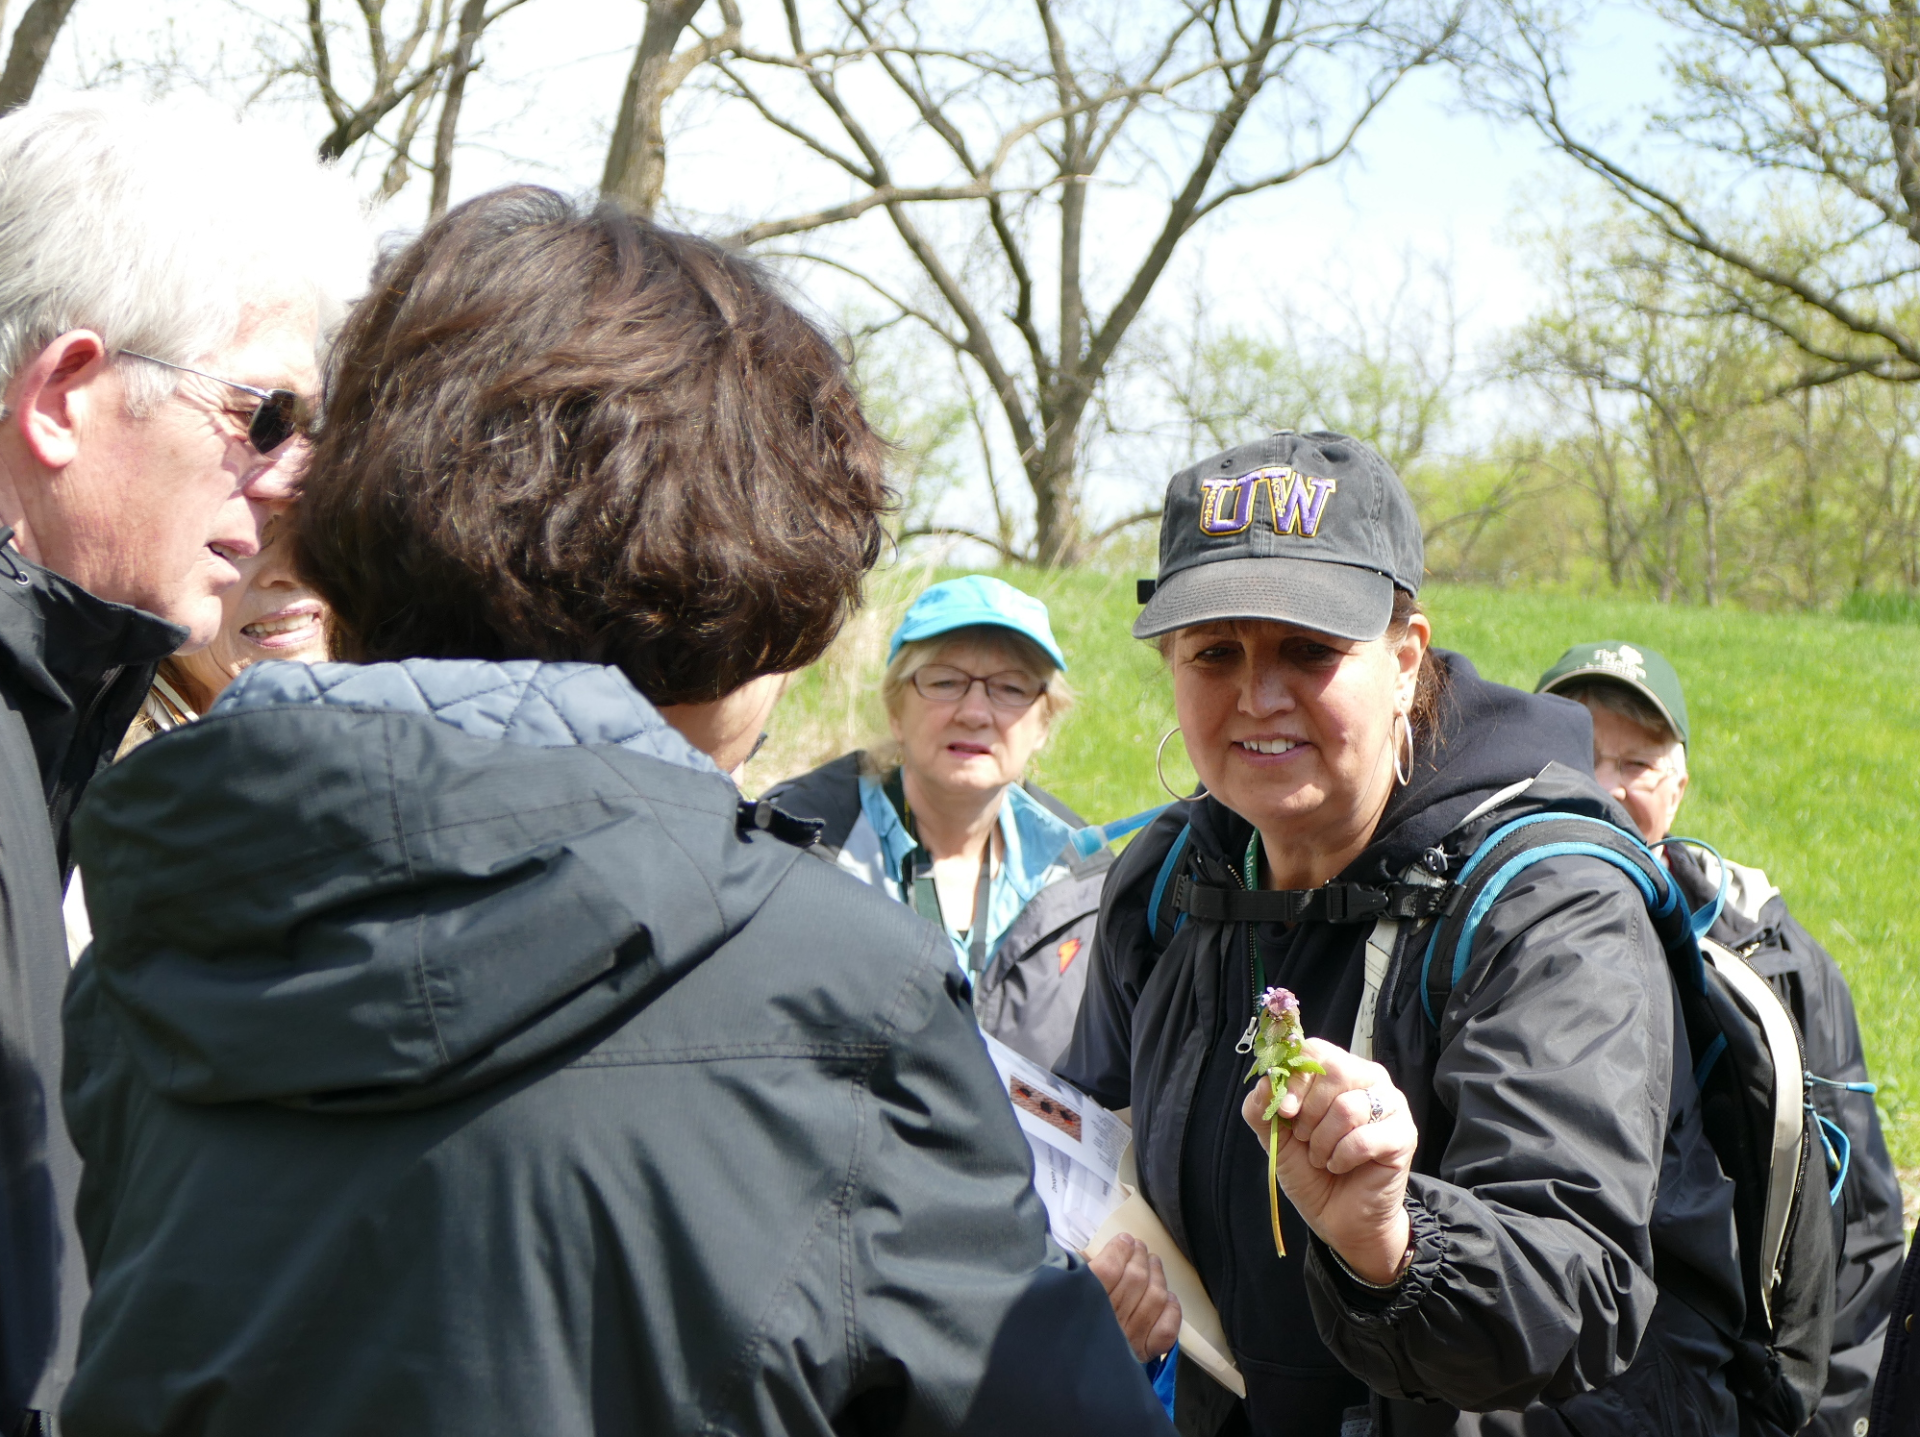 Spring wildflower class led by Cindy Crosby